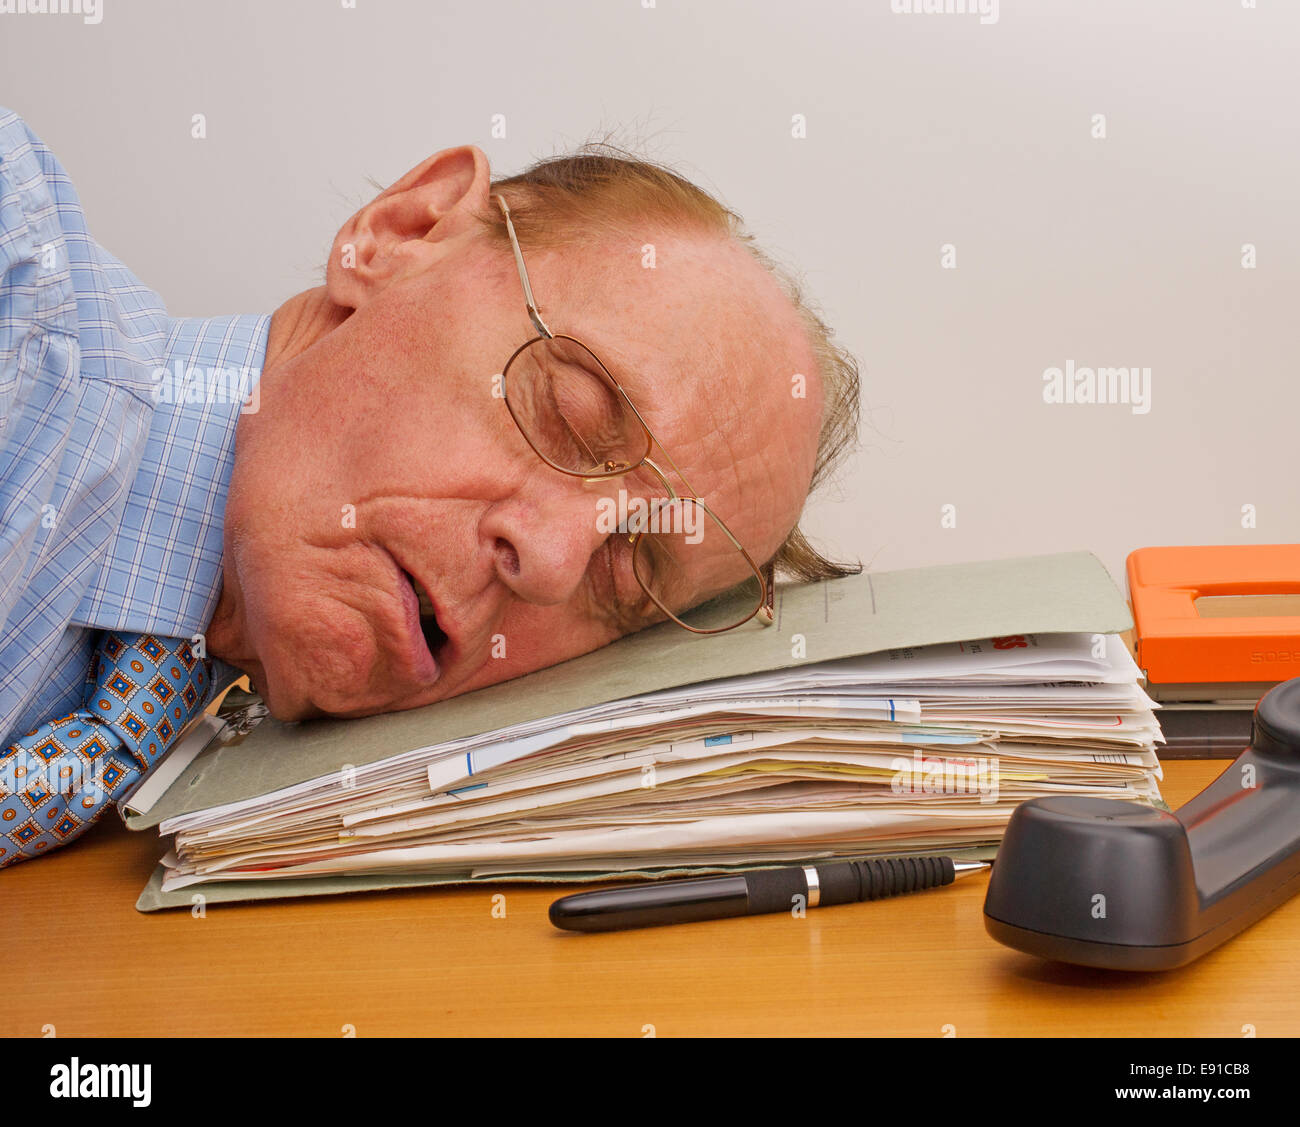 Sleeping in the Office Stock Photo